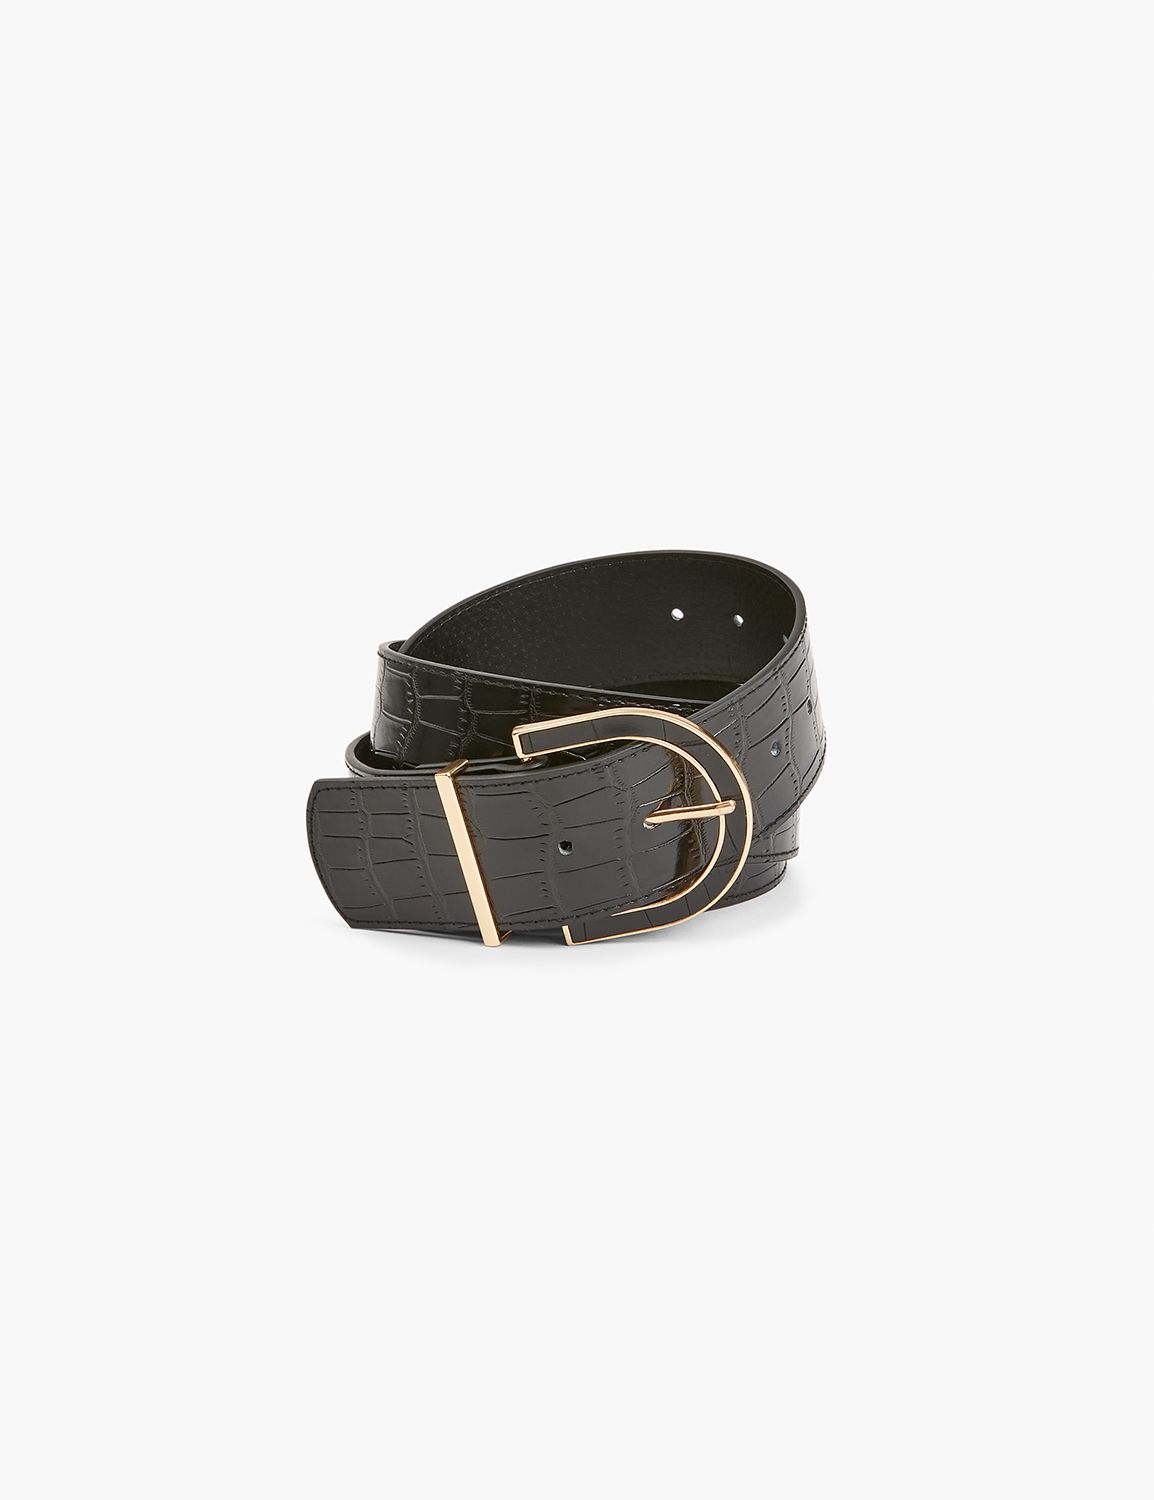 CROCO BELT WITH COVERED BUCKLE | LaneBryant